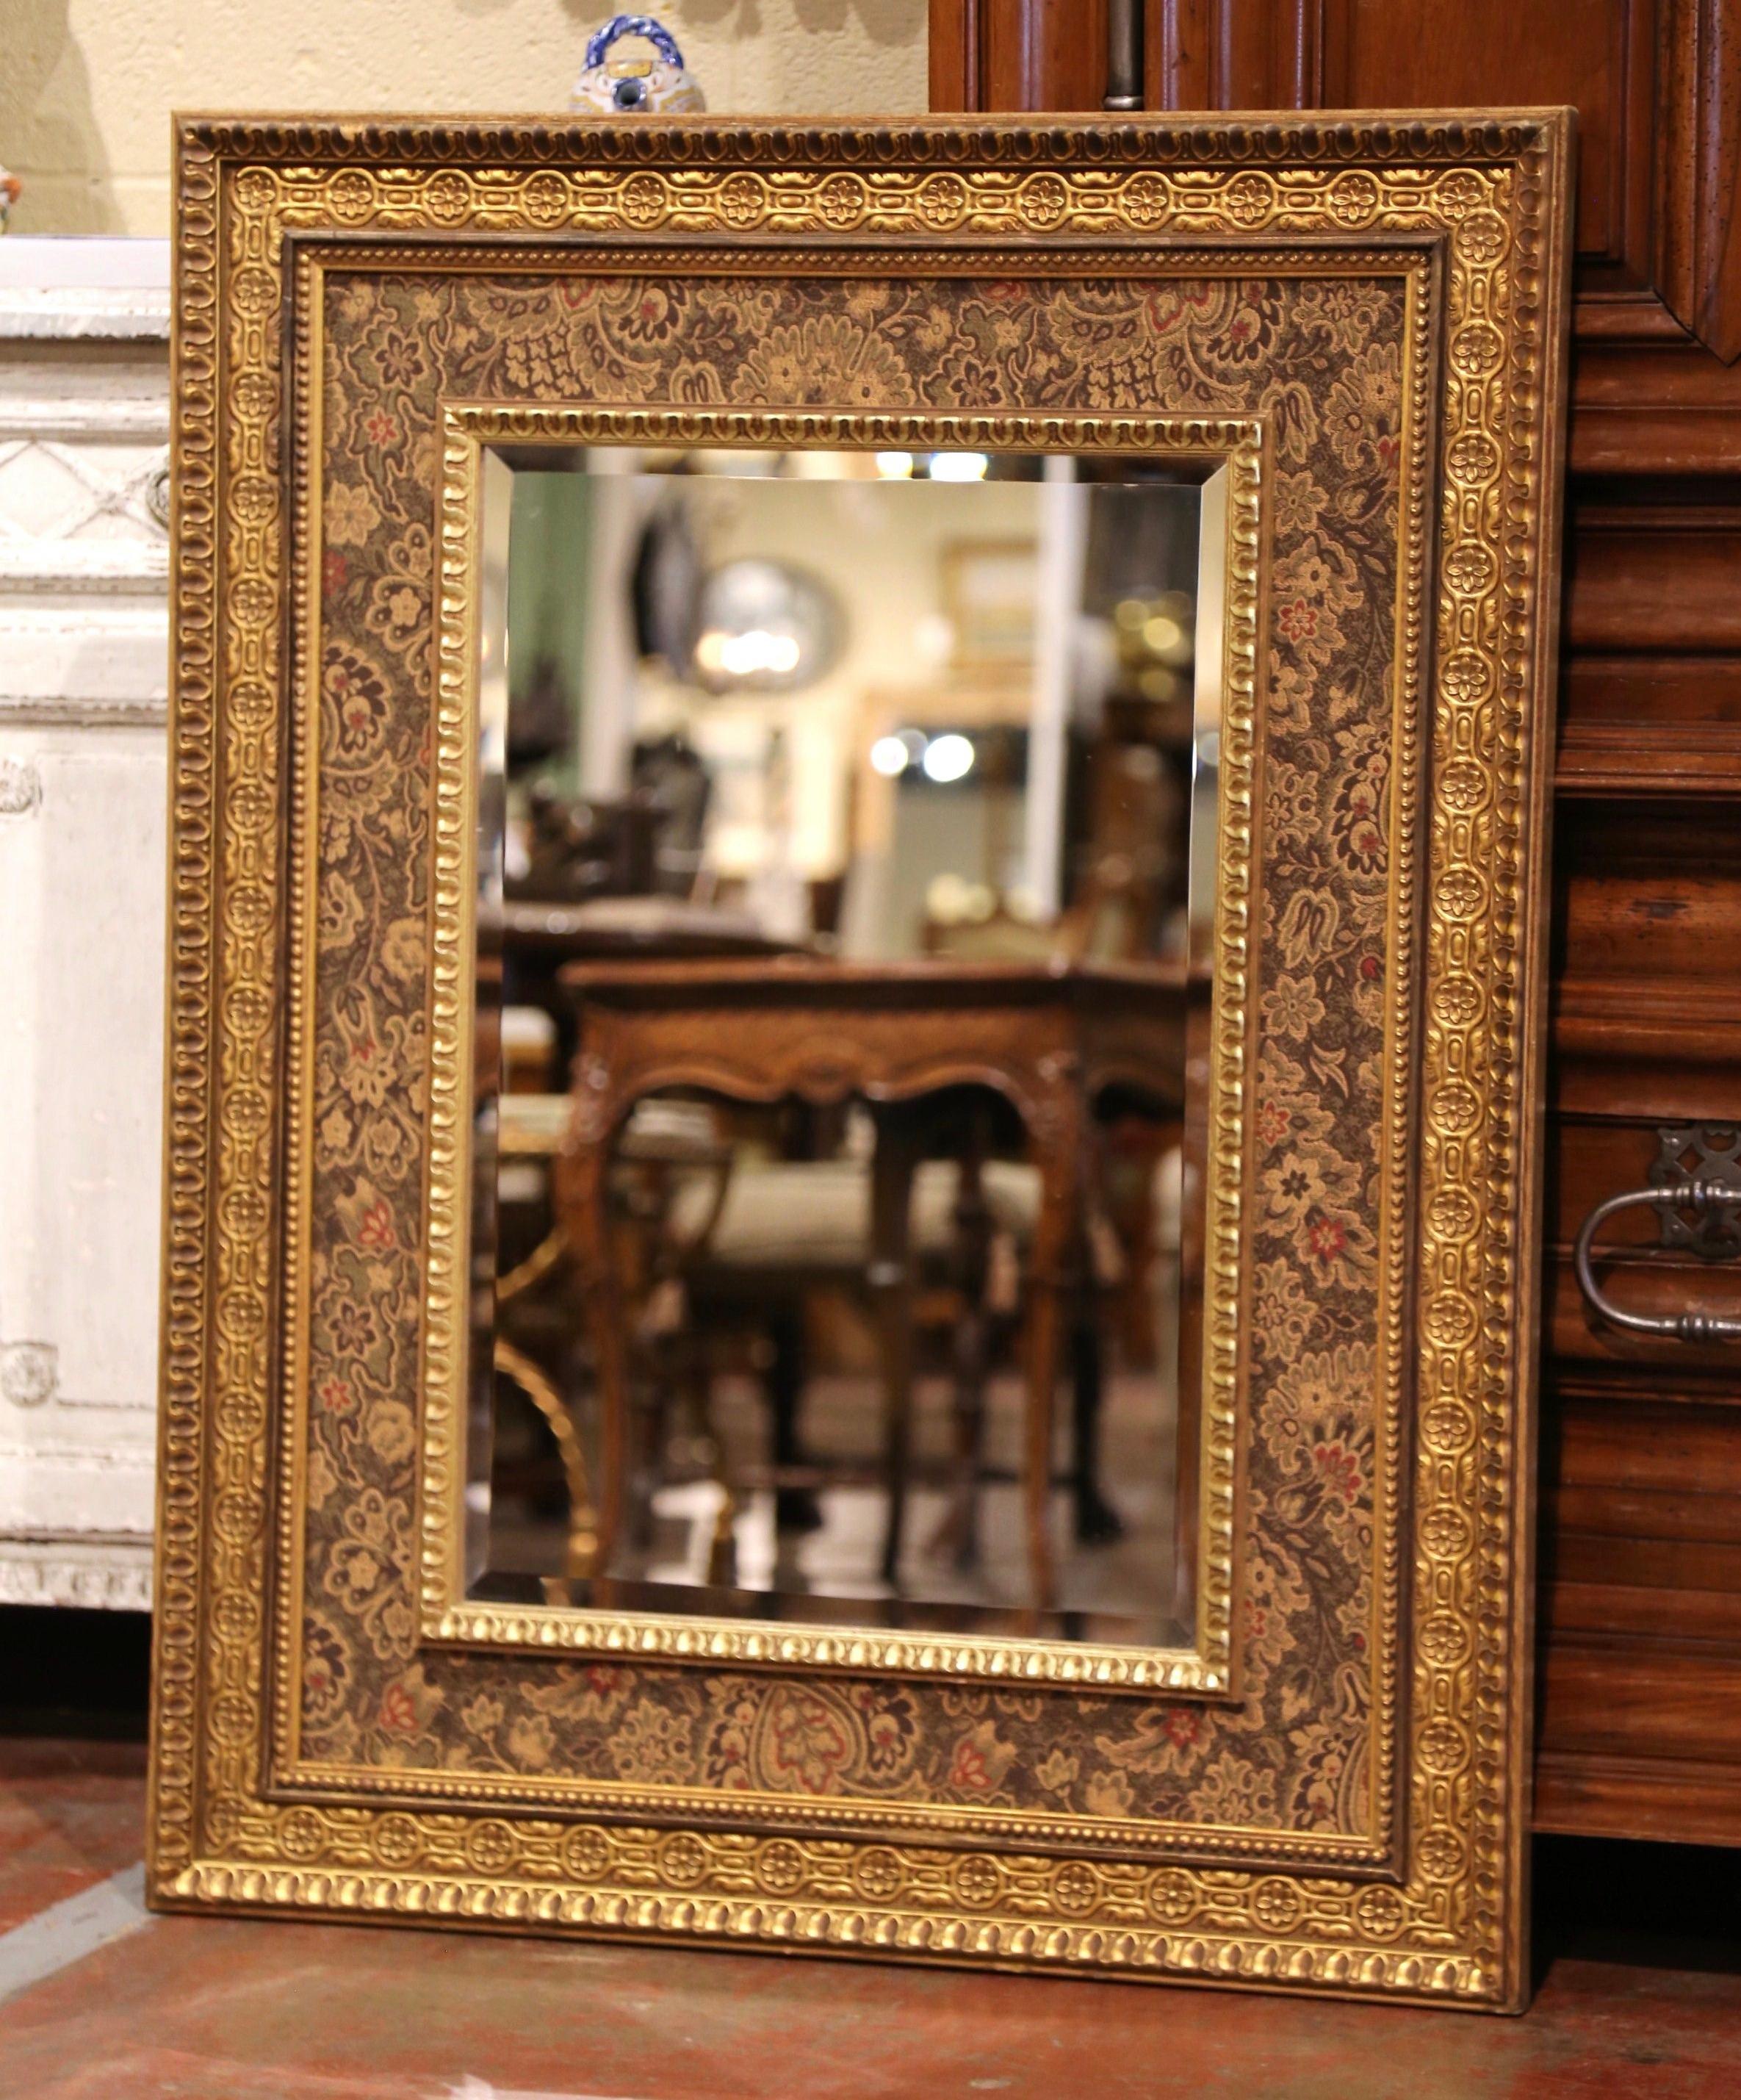 Decorate a powder room or bedroom with this elegant and colorful vintage mirror. Crafted in Italy circa 1980, the mirror features an ornate carved frame embellished with a Paisley fabric border. The frame is further dressed with a beveled mirror.